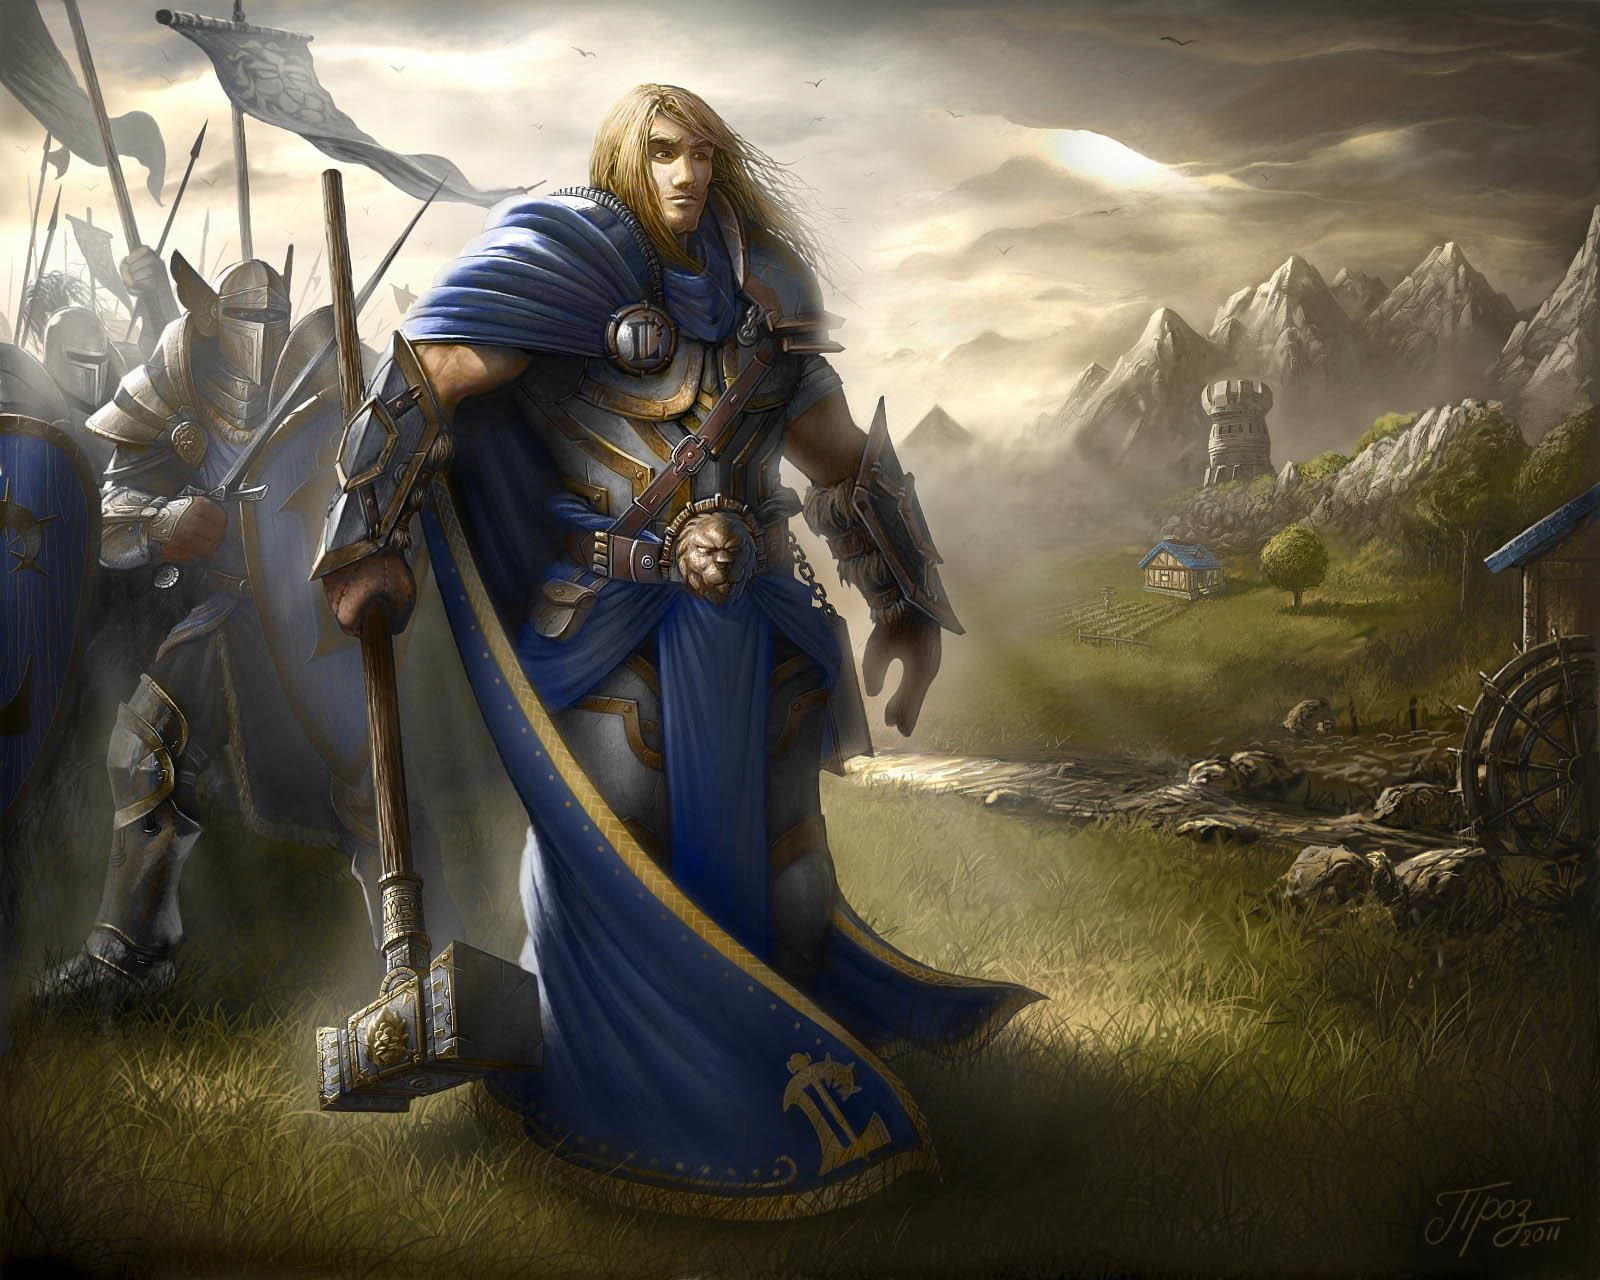 Warcraft III: Reign Of Chaos Backgrounds, Compatible - PC, Mobile, Gadgets| 1600x1280 px